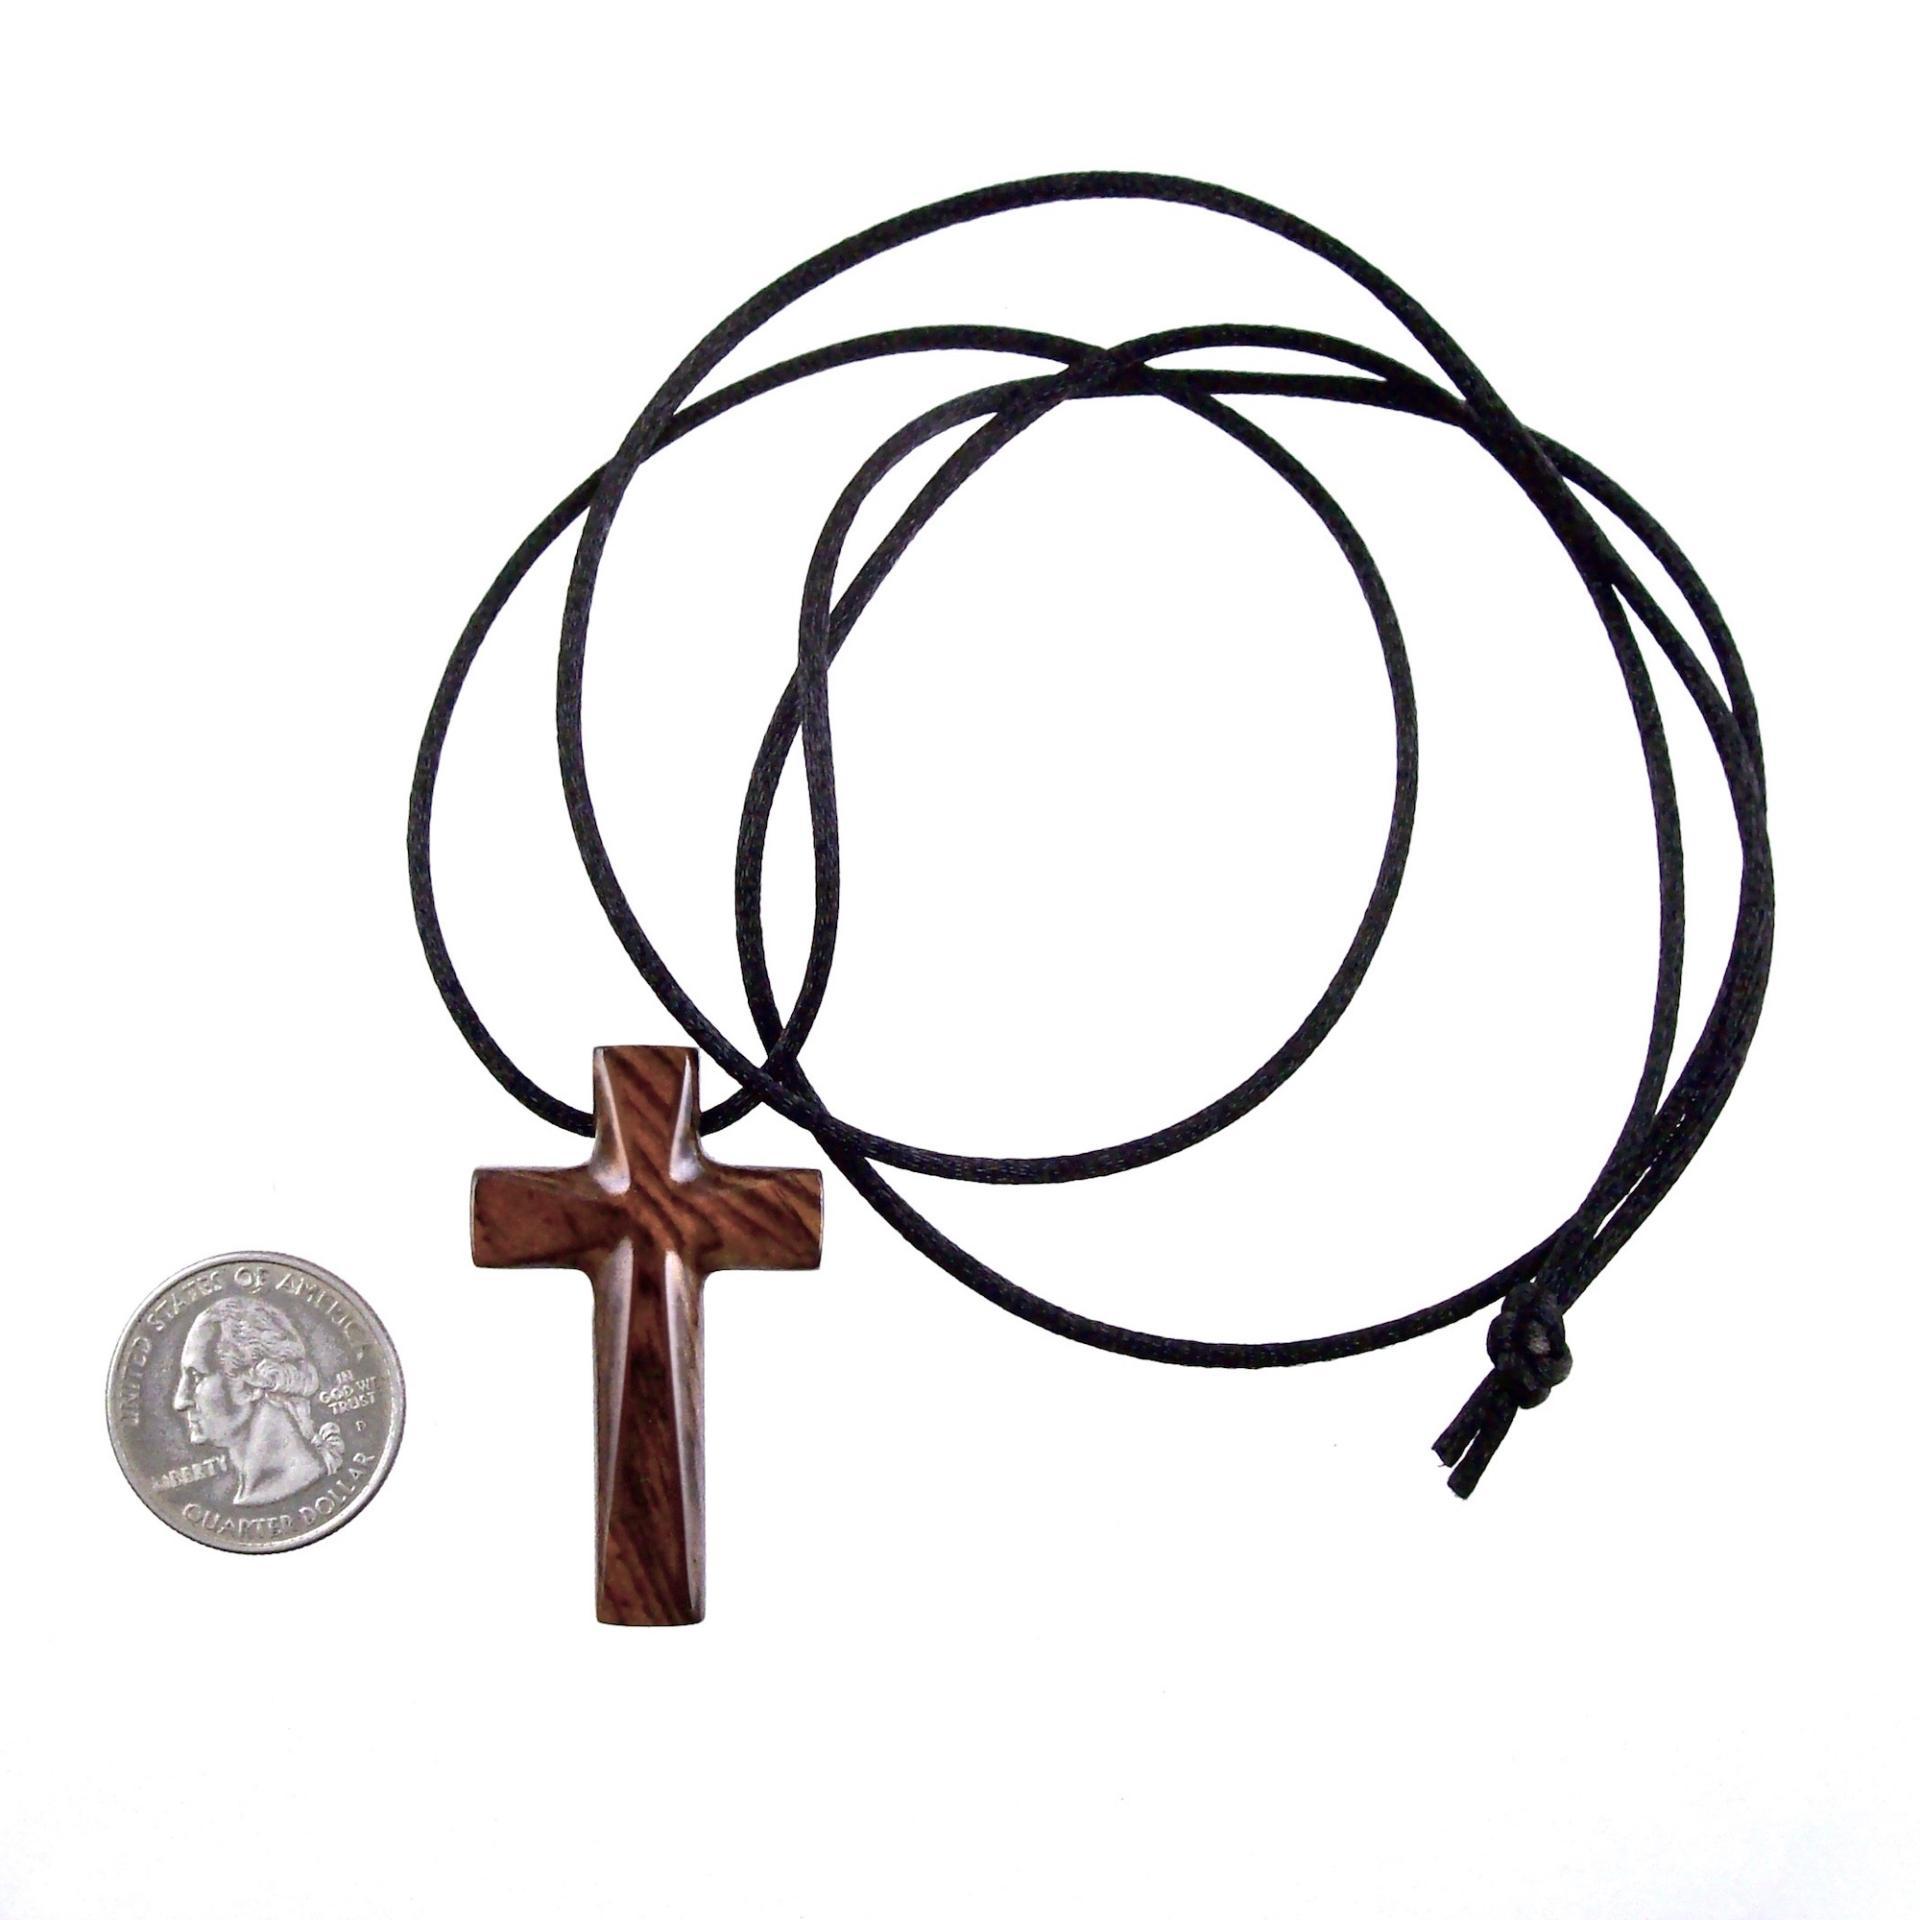 Wooden Cross Necklace, Wood Cross Pendant, Hand Carved Christian Jewelry for Men, One of a Kind Gift for Him